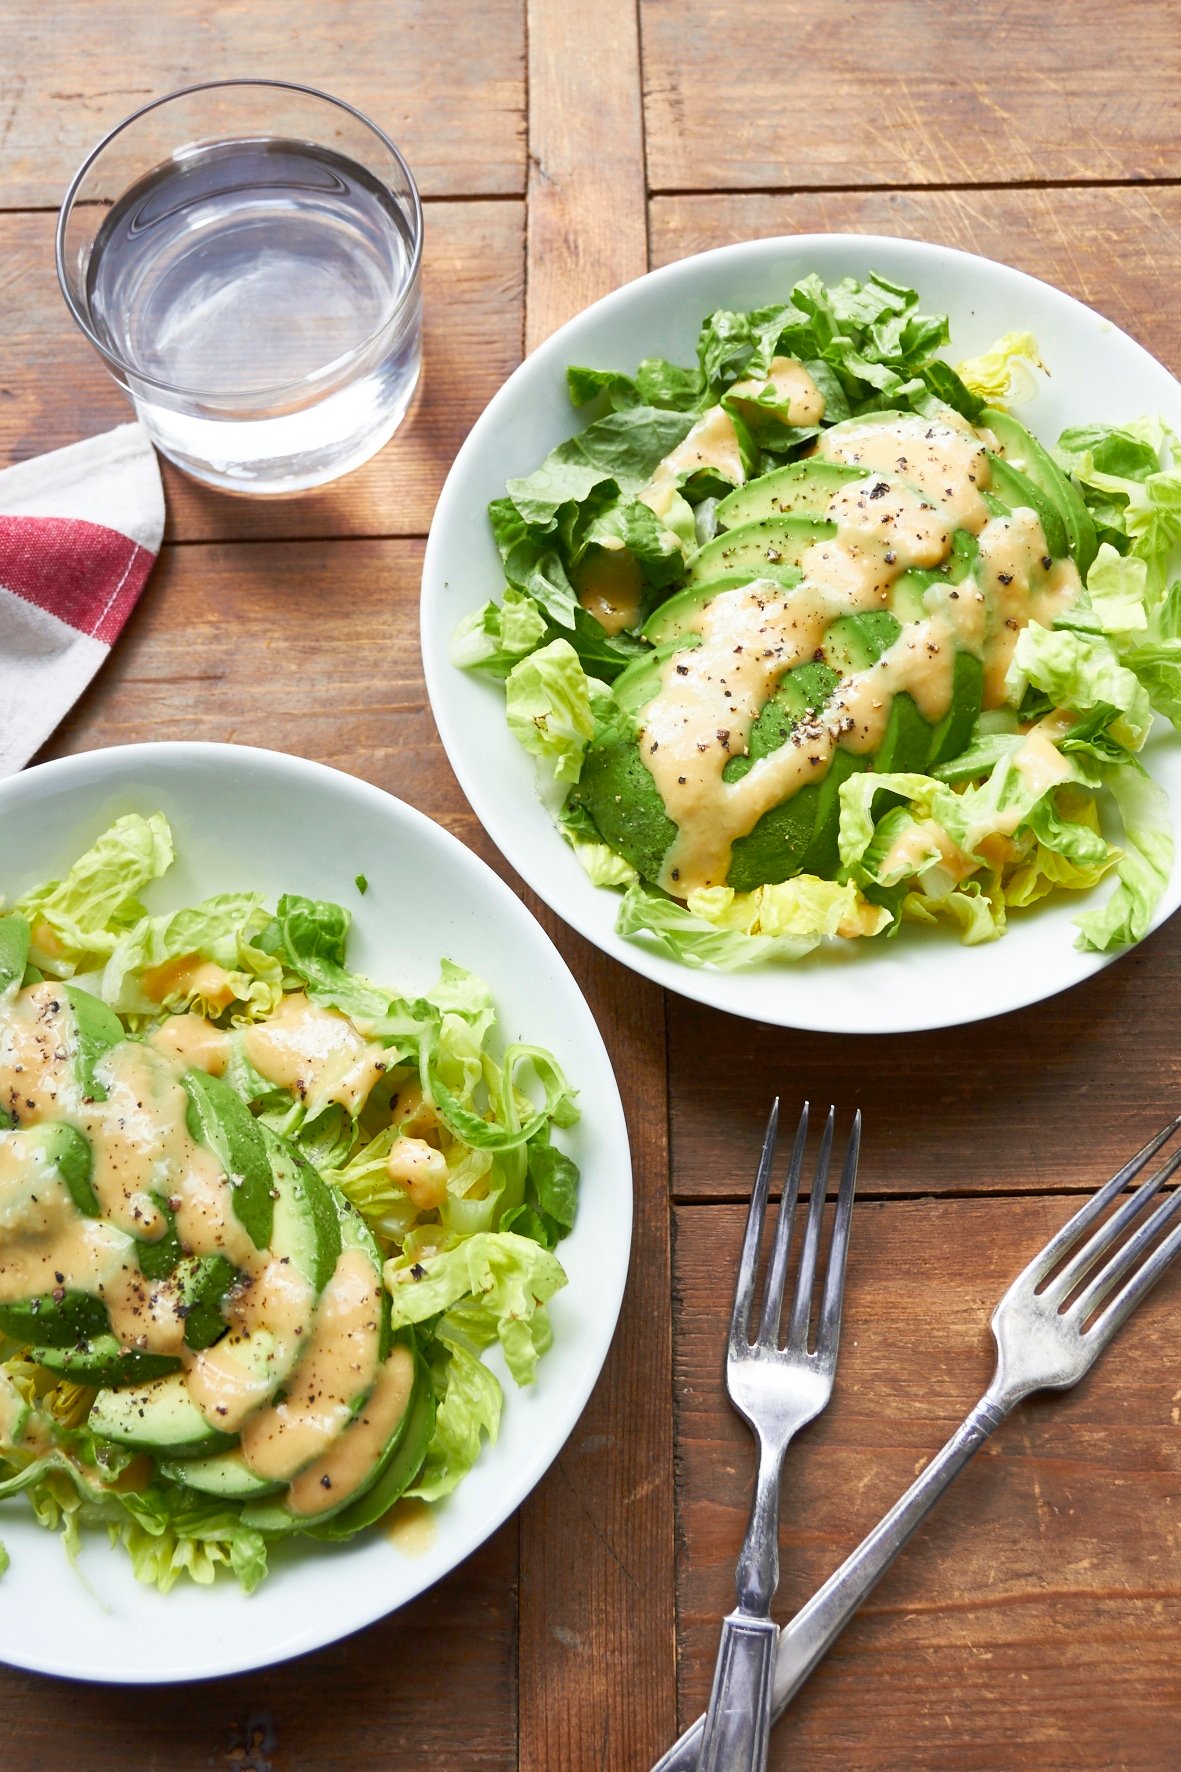 Two plates of avocado salad with creamy miso dressing.